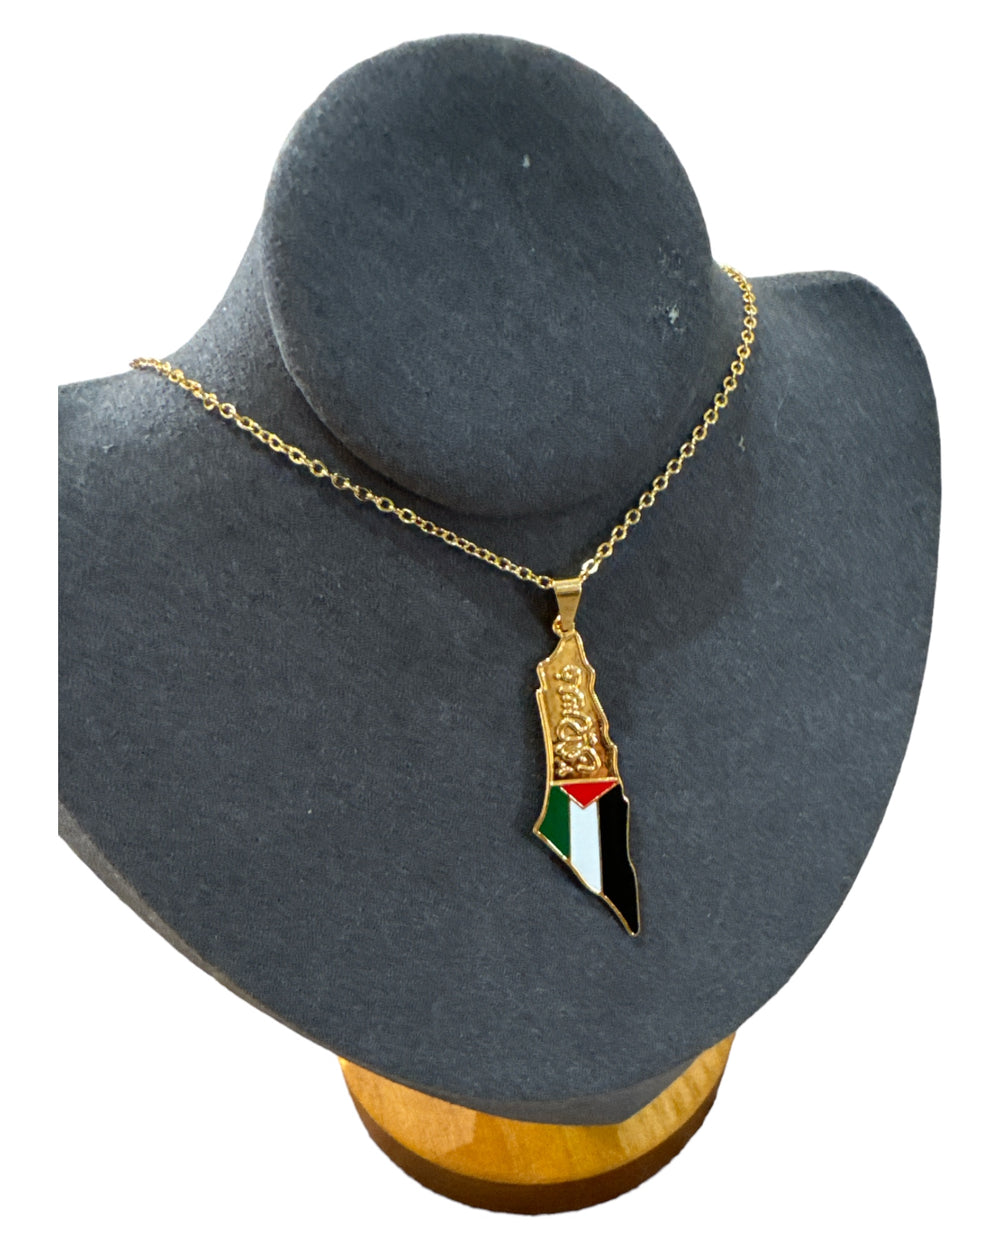 Heritage Gold Medallion Necklace: Arabic Calligraphy and Palestine Flag